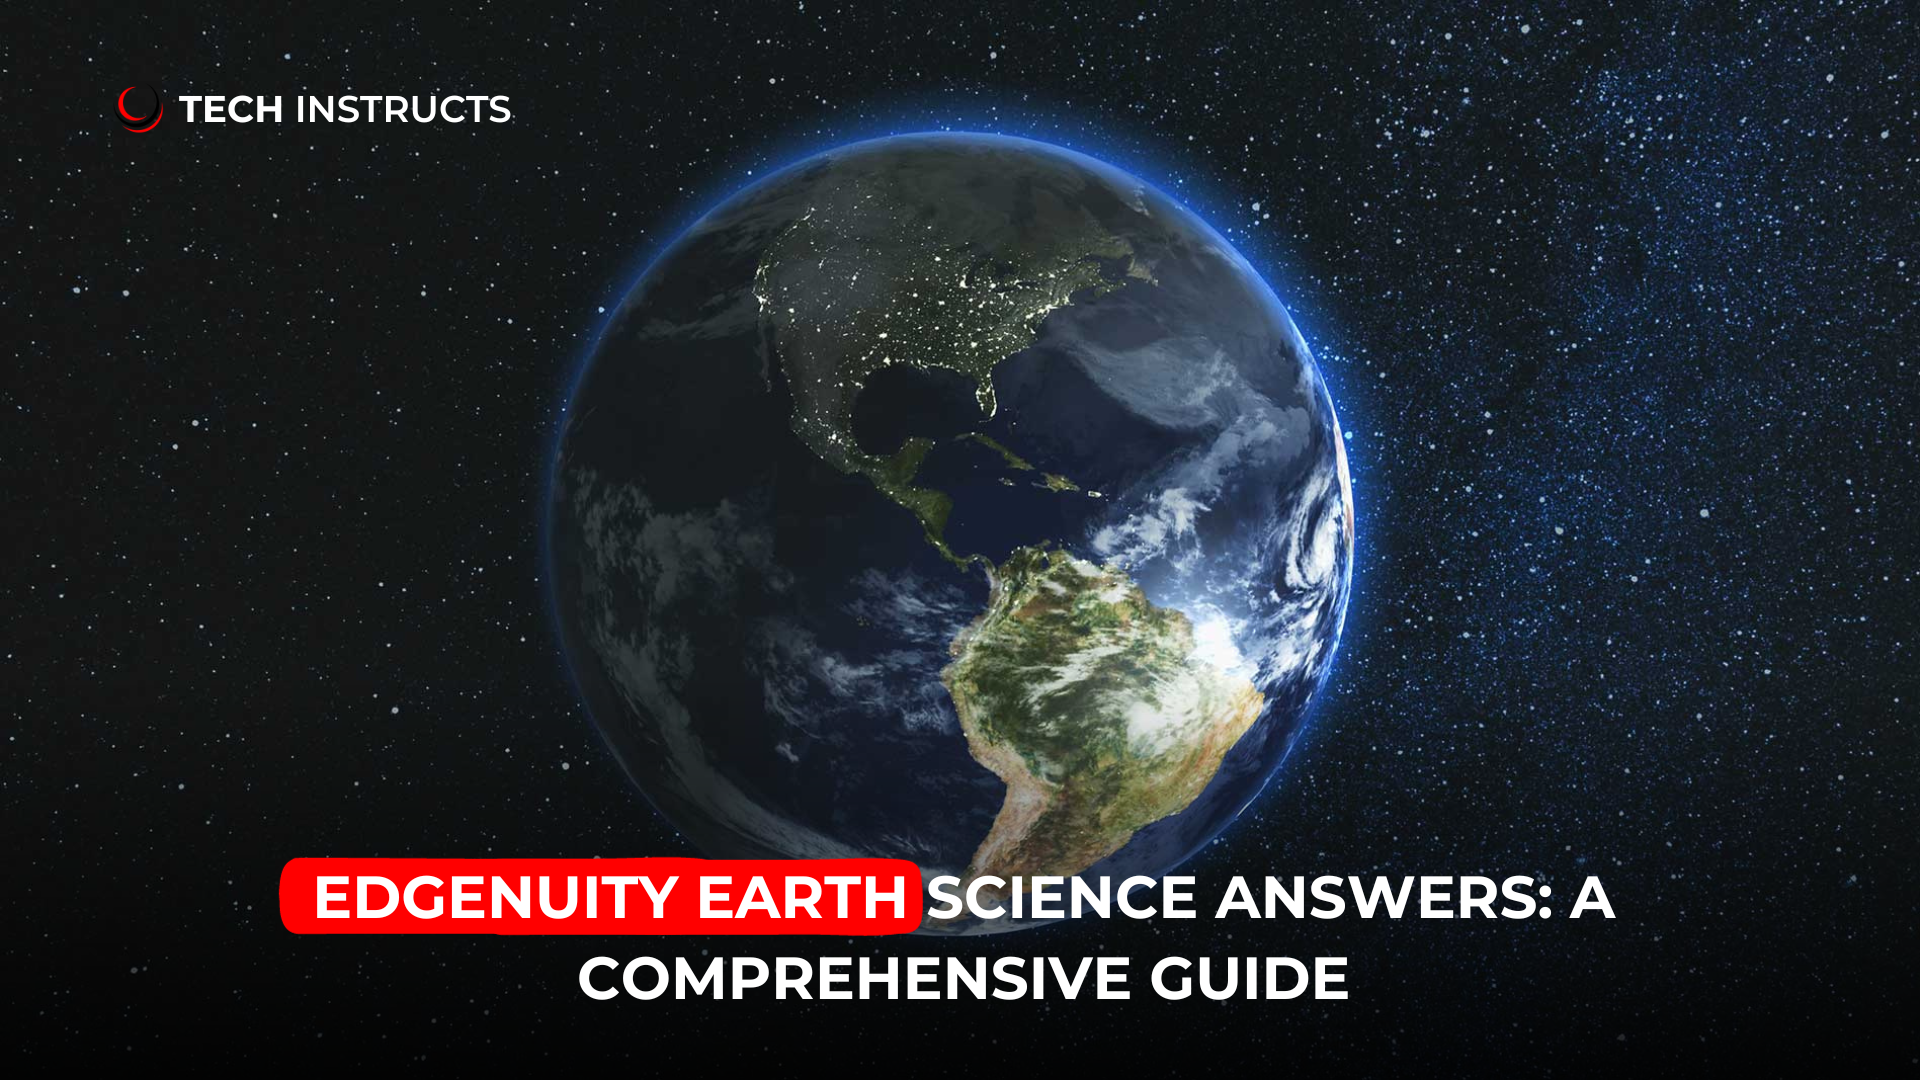 Edgenuity Earth Science Answers: Full Step By Step Guide